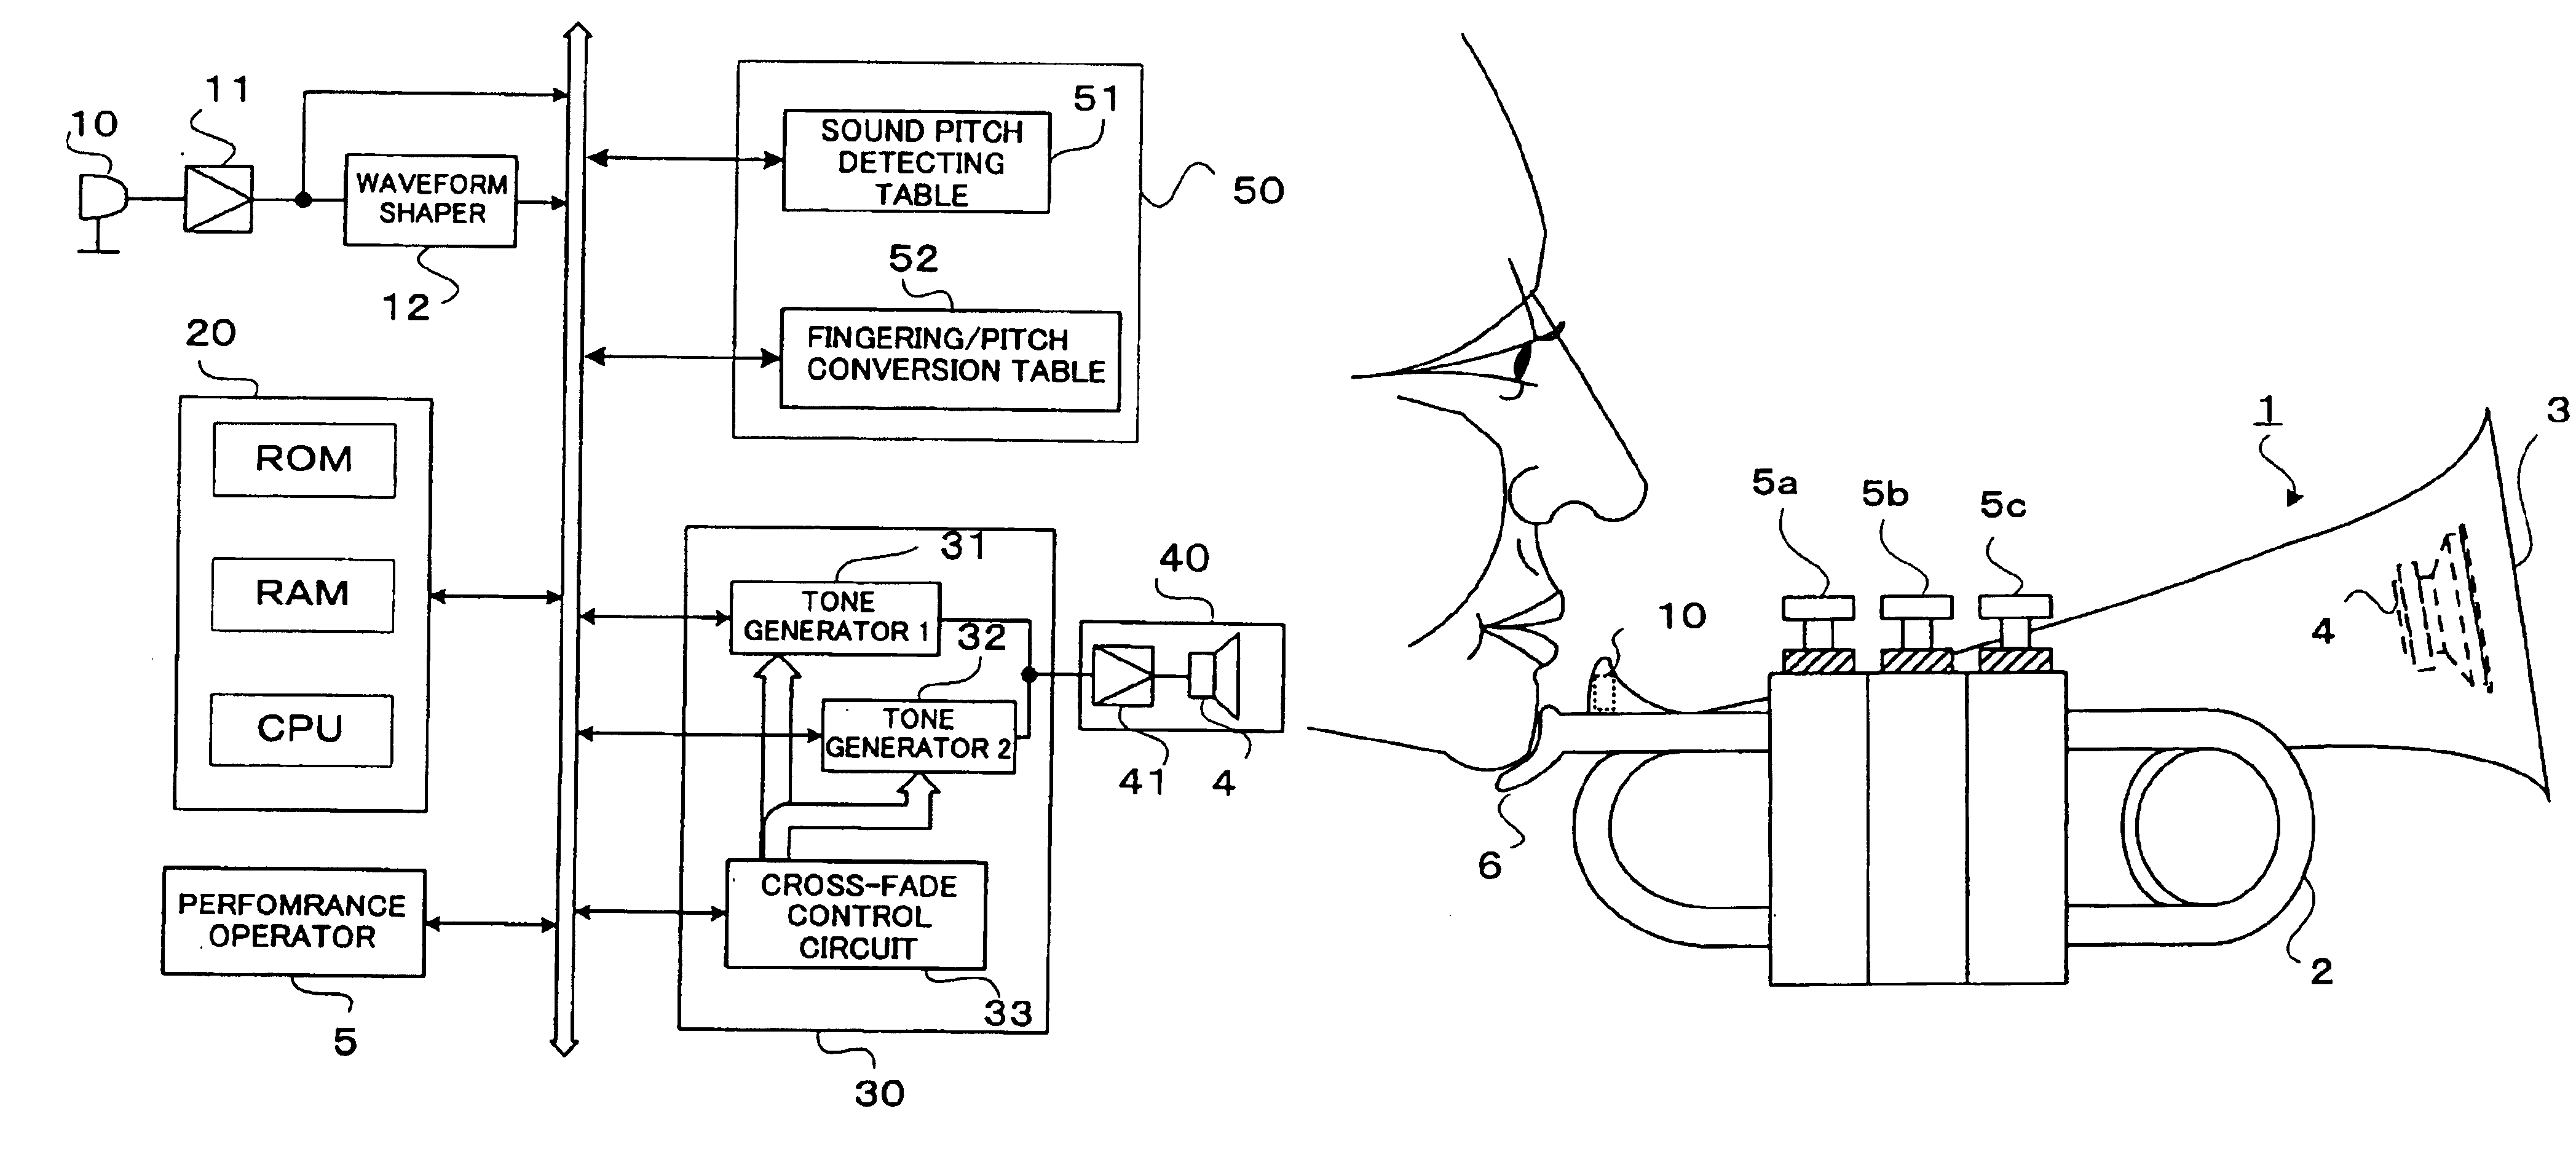 Musical tone generating apparatus and method for generating musical tone on the basis of detection of pitch of input vibration signal